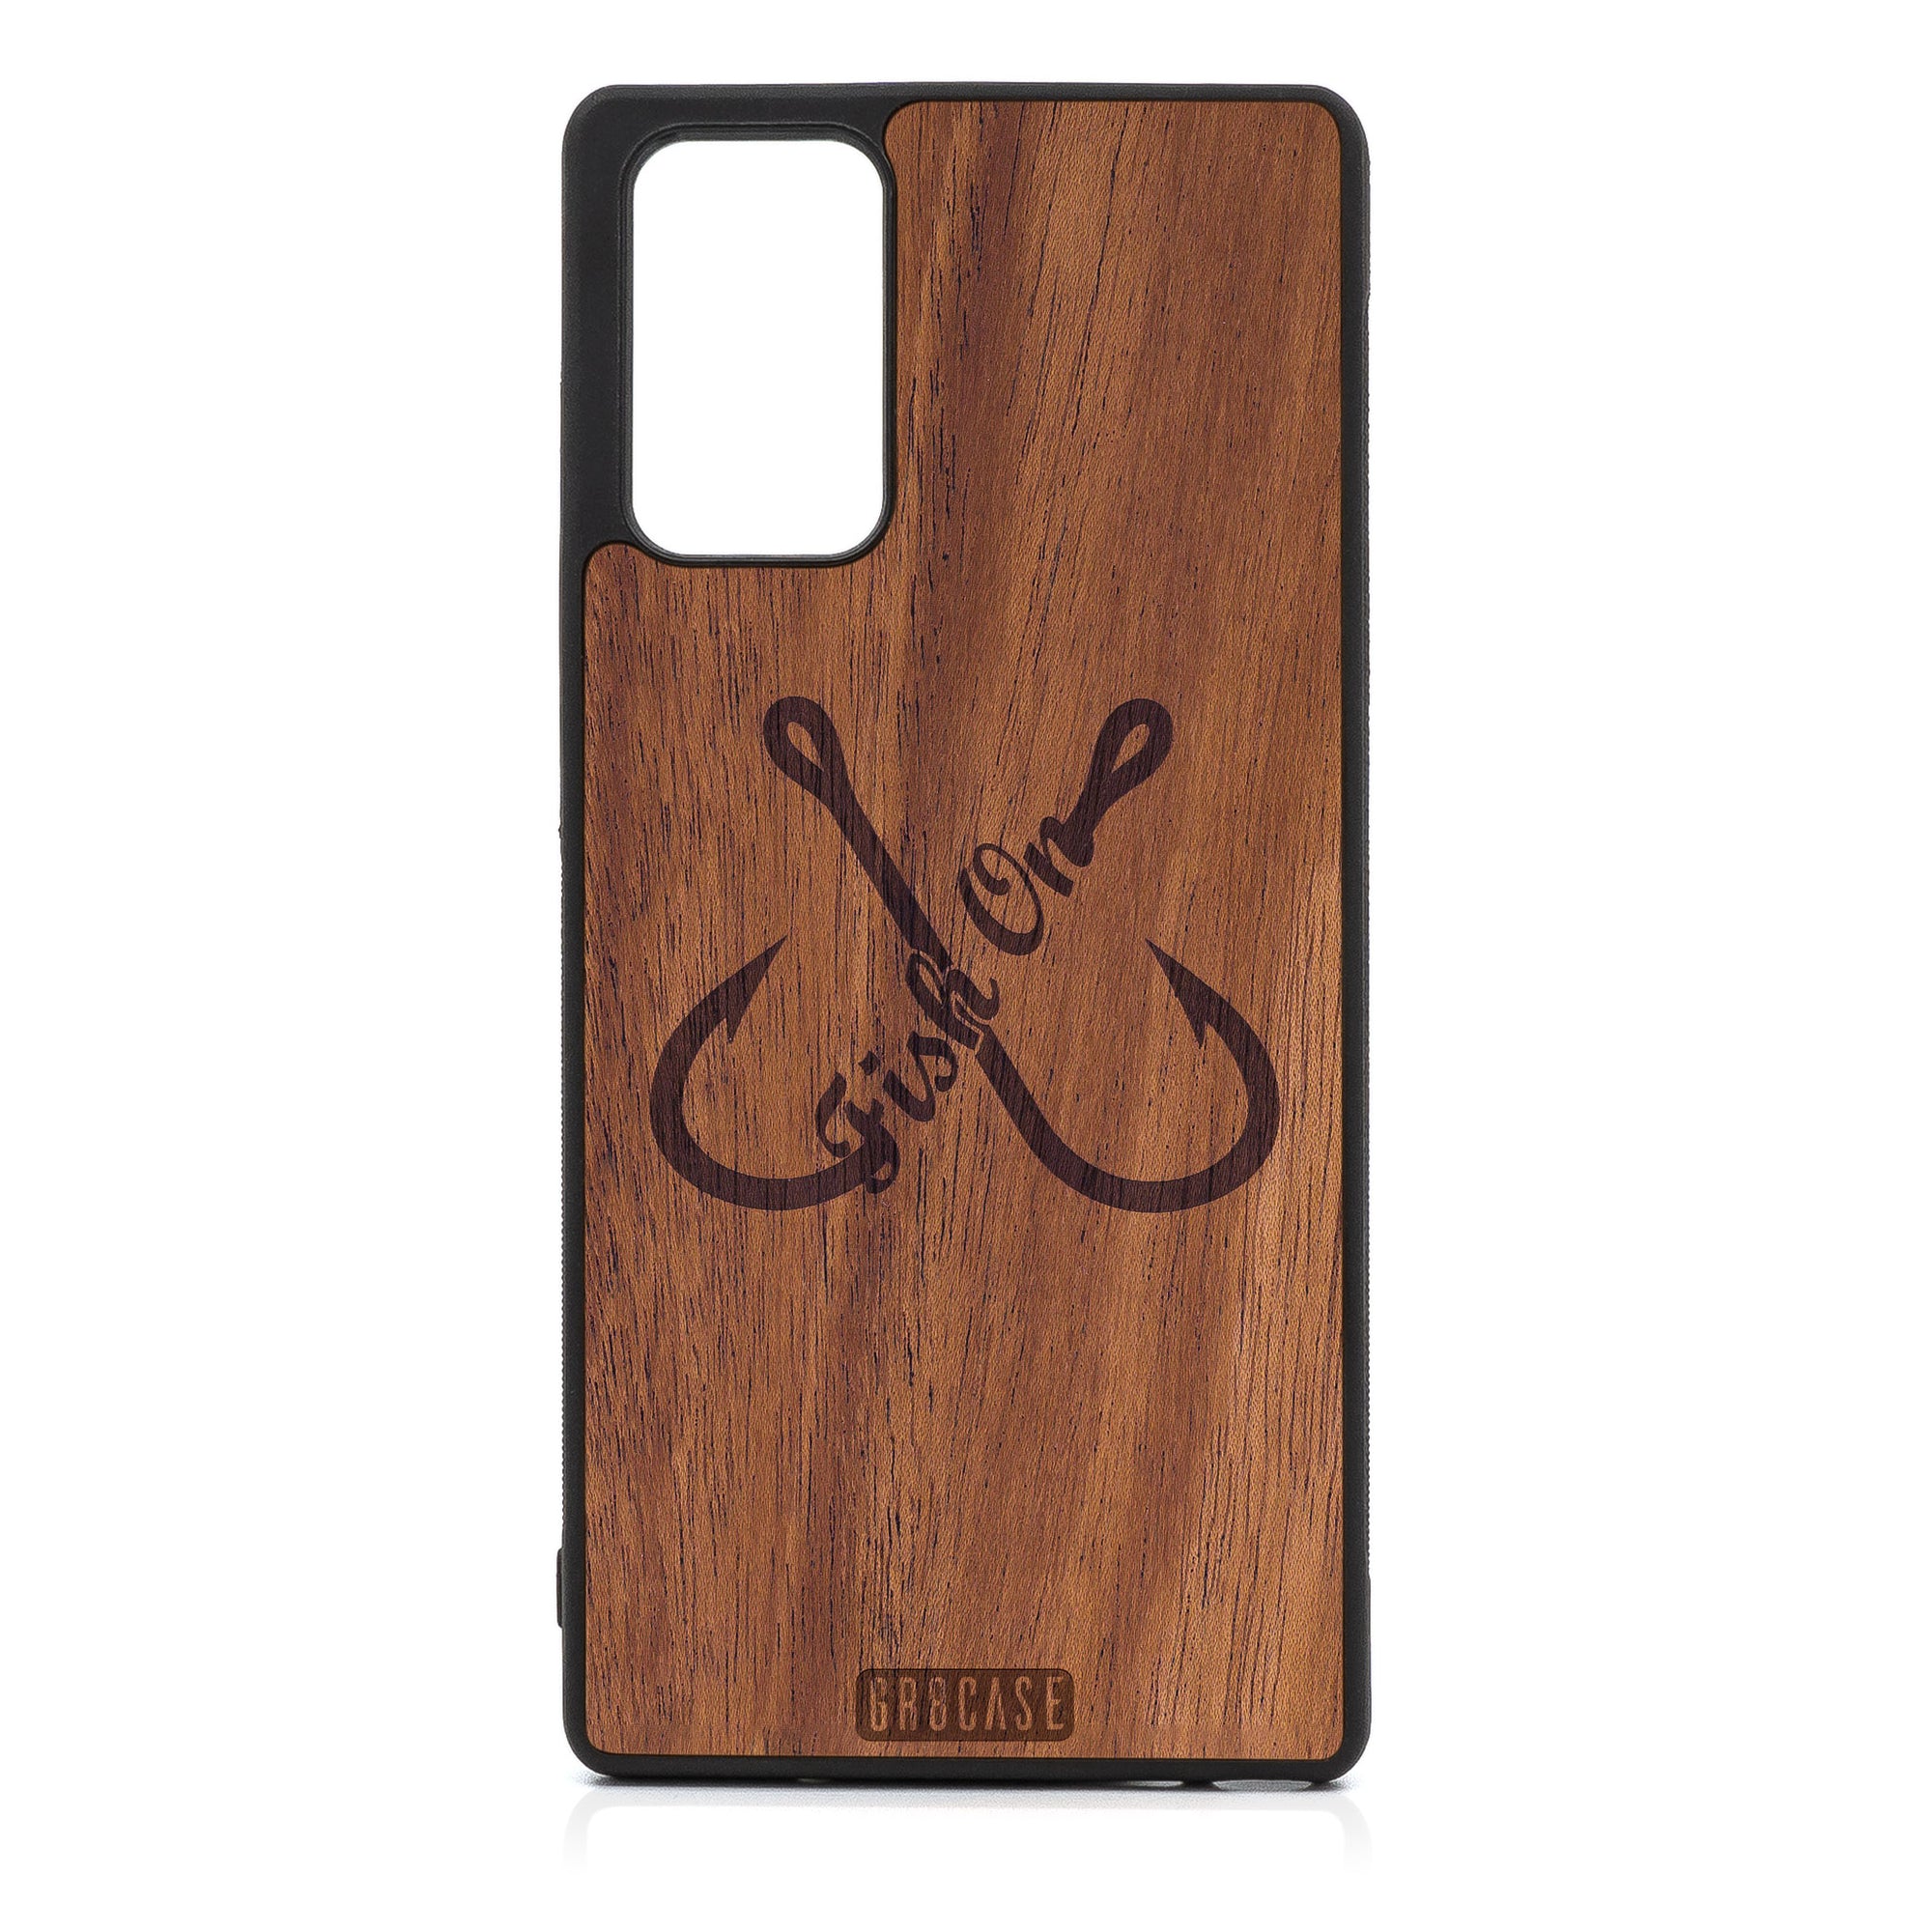 Fish On (Fish Hooks) Design Wood Case For Samsung Galaxy Note 20